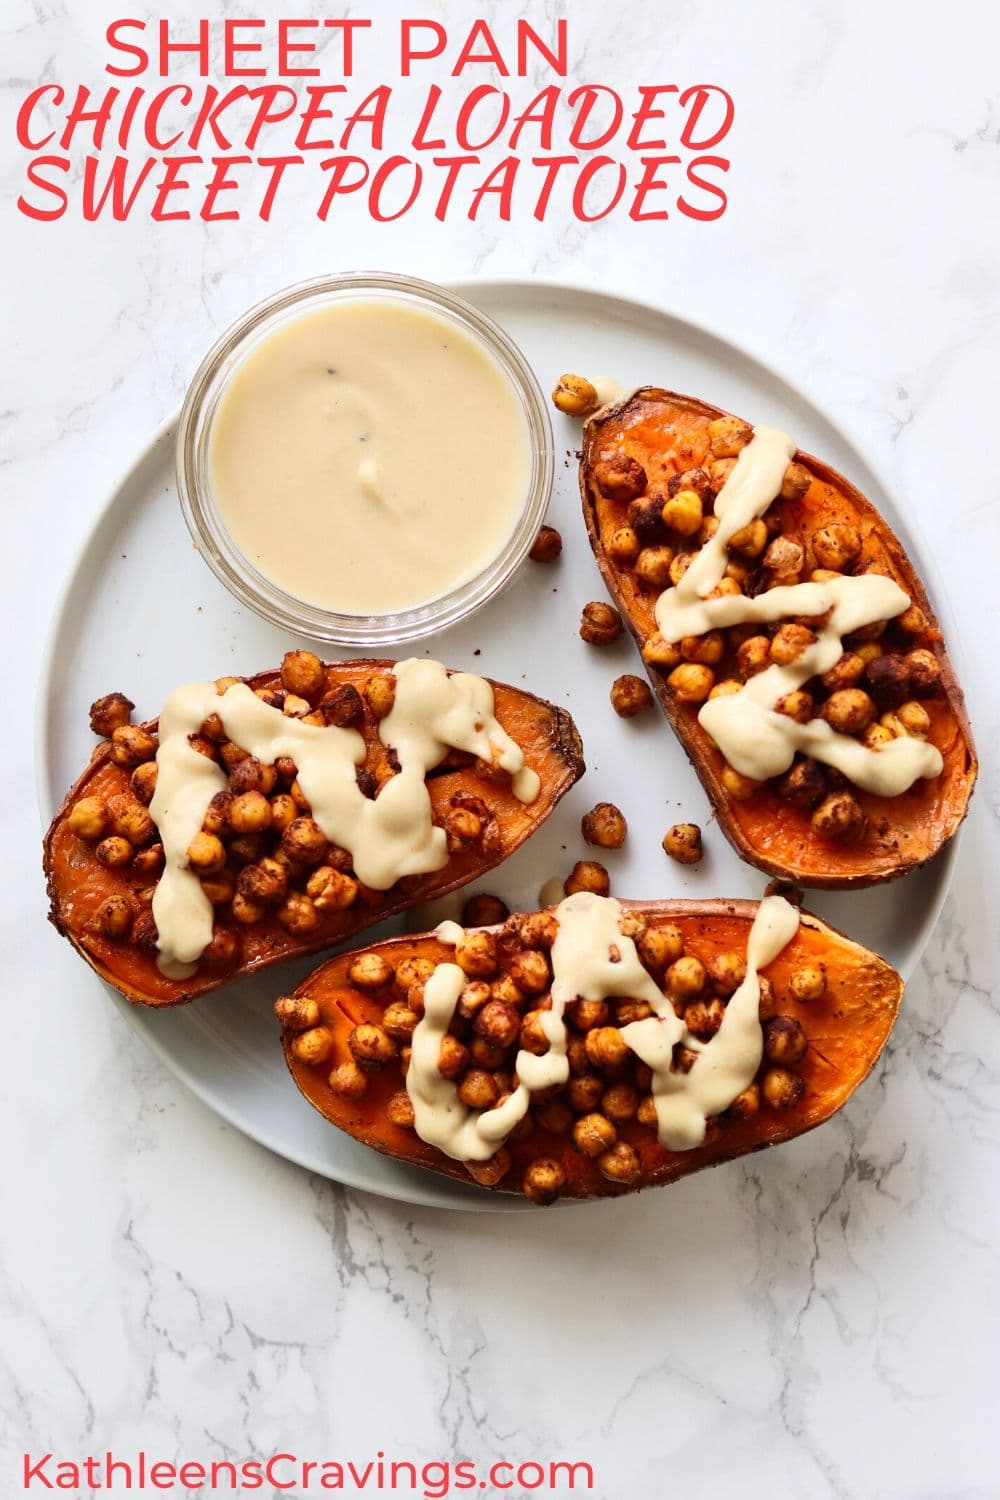 Sheet Pan Chickpea Loaded Sweet Potatoes with text overlay